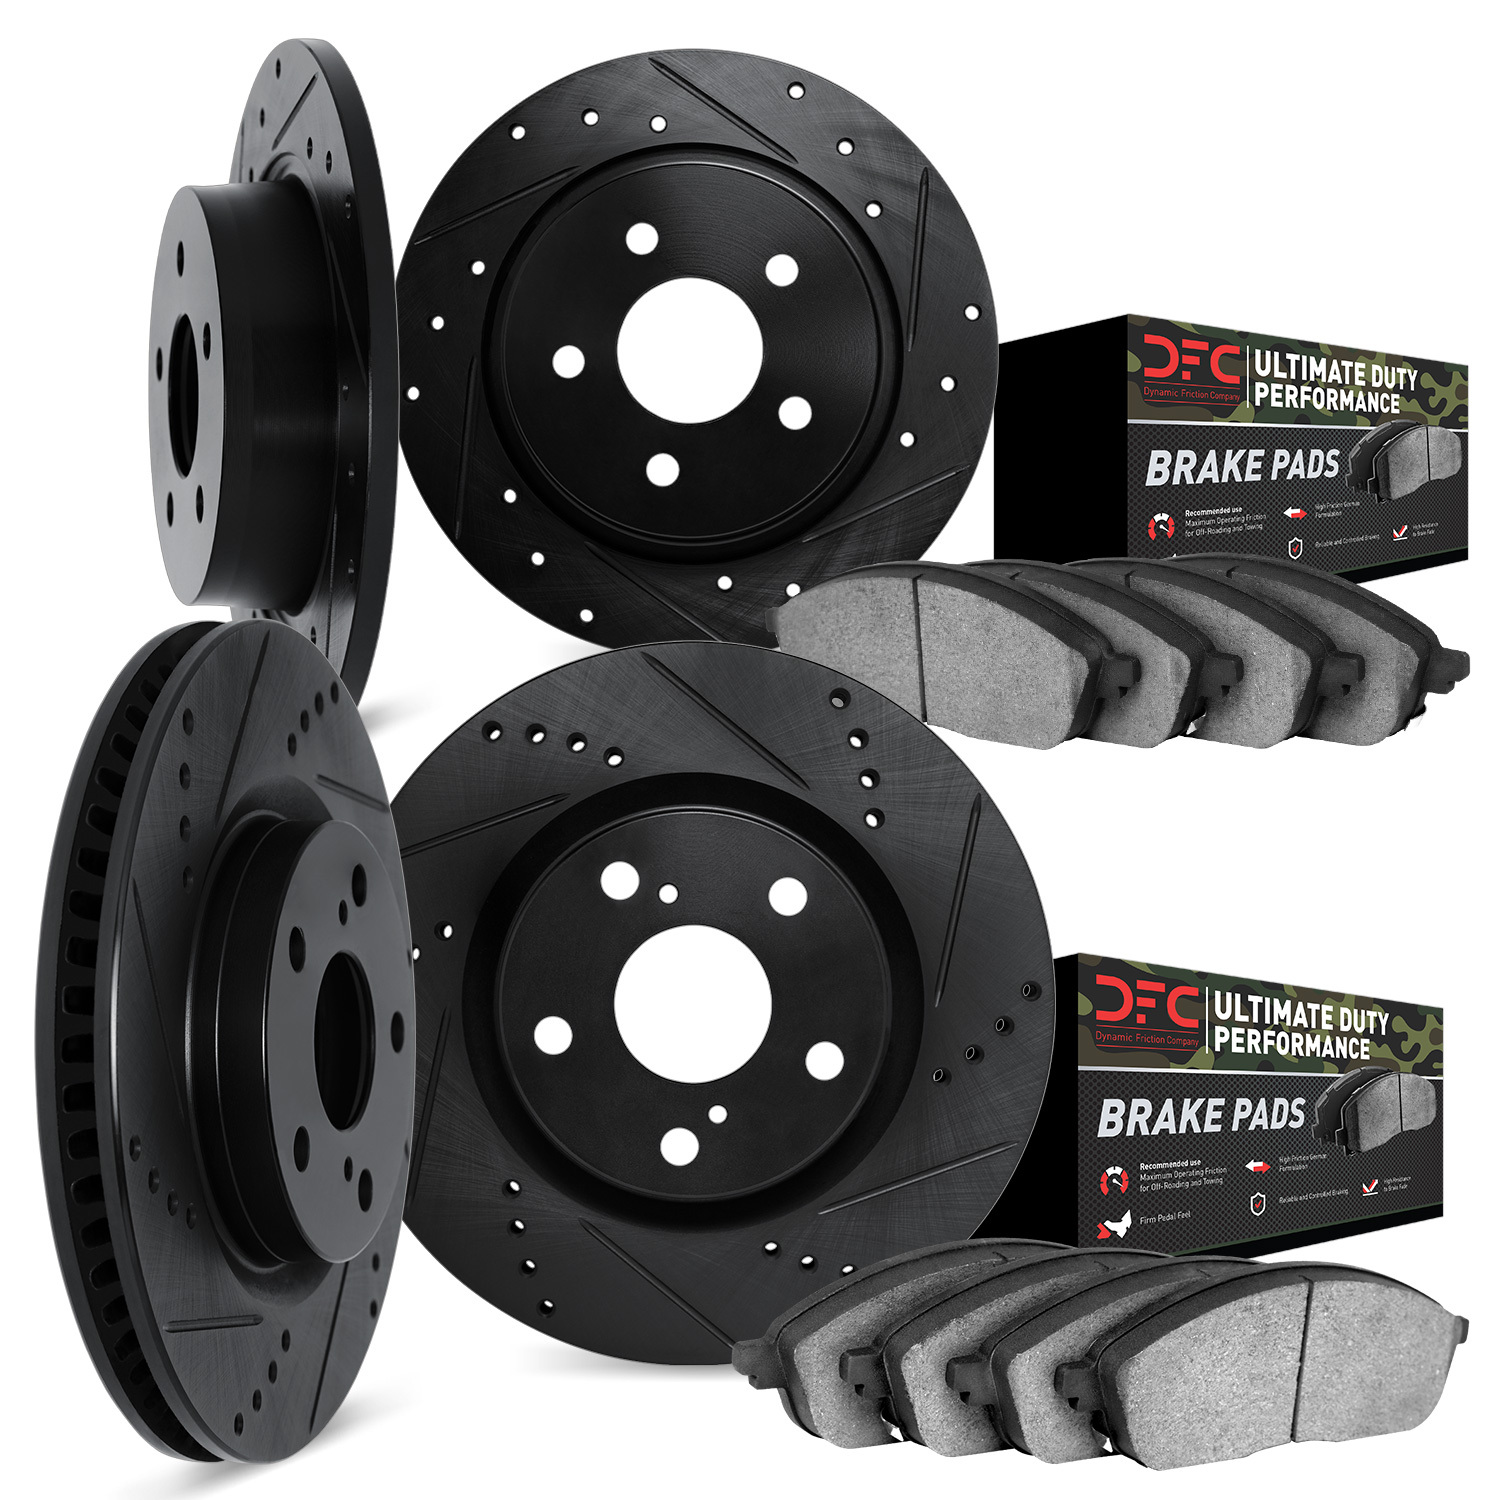 8404-54003 Drilled/Slotted Brake Rotors with Ultimate-Duty Brake Pads Kit [Black], 2001-2002 Ford/Lincoln/Mercury/Mazda, Positio